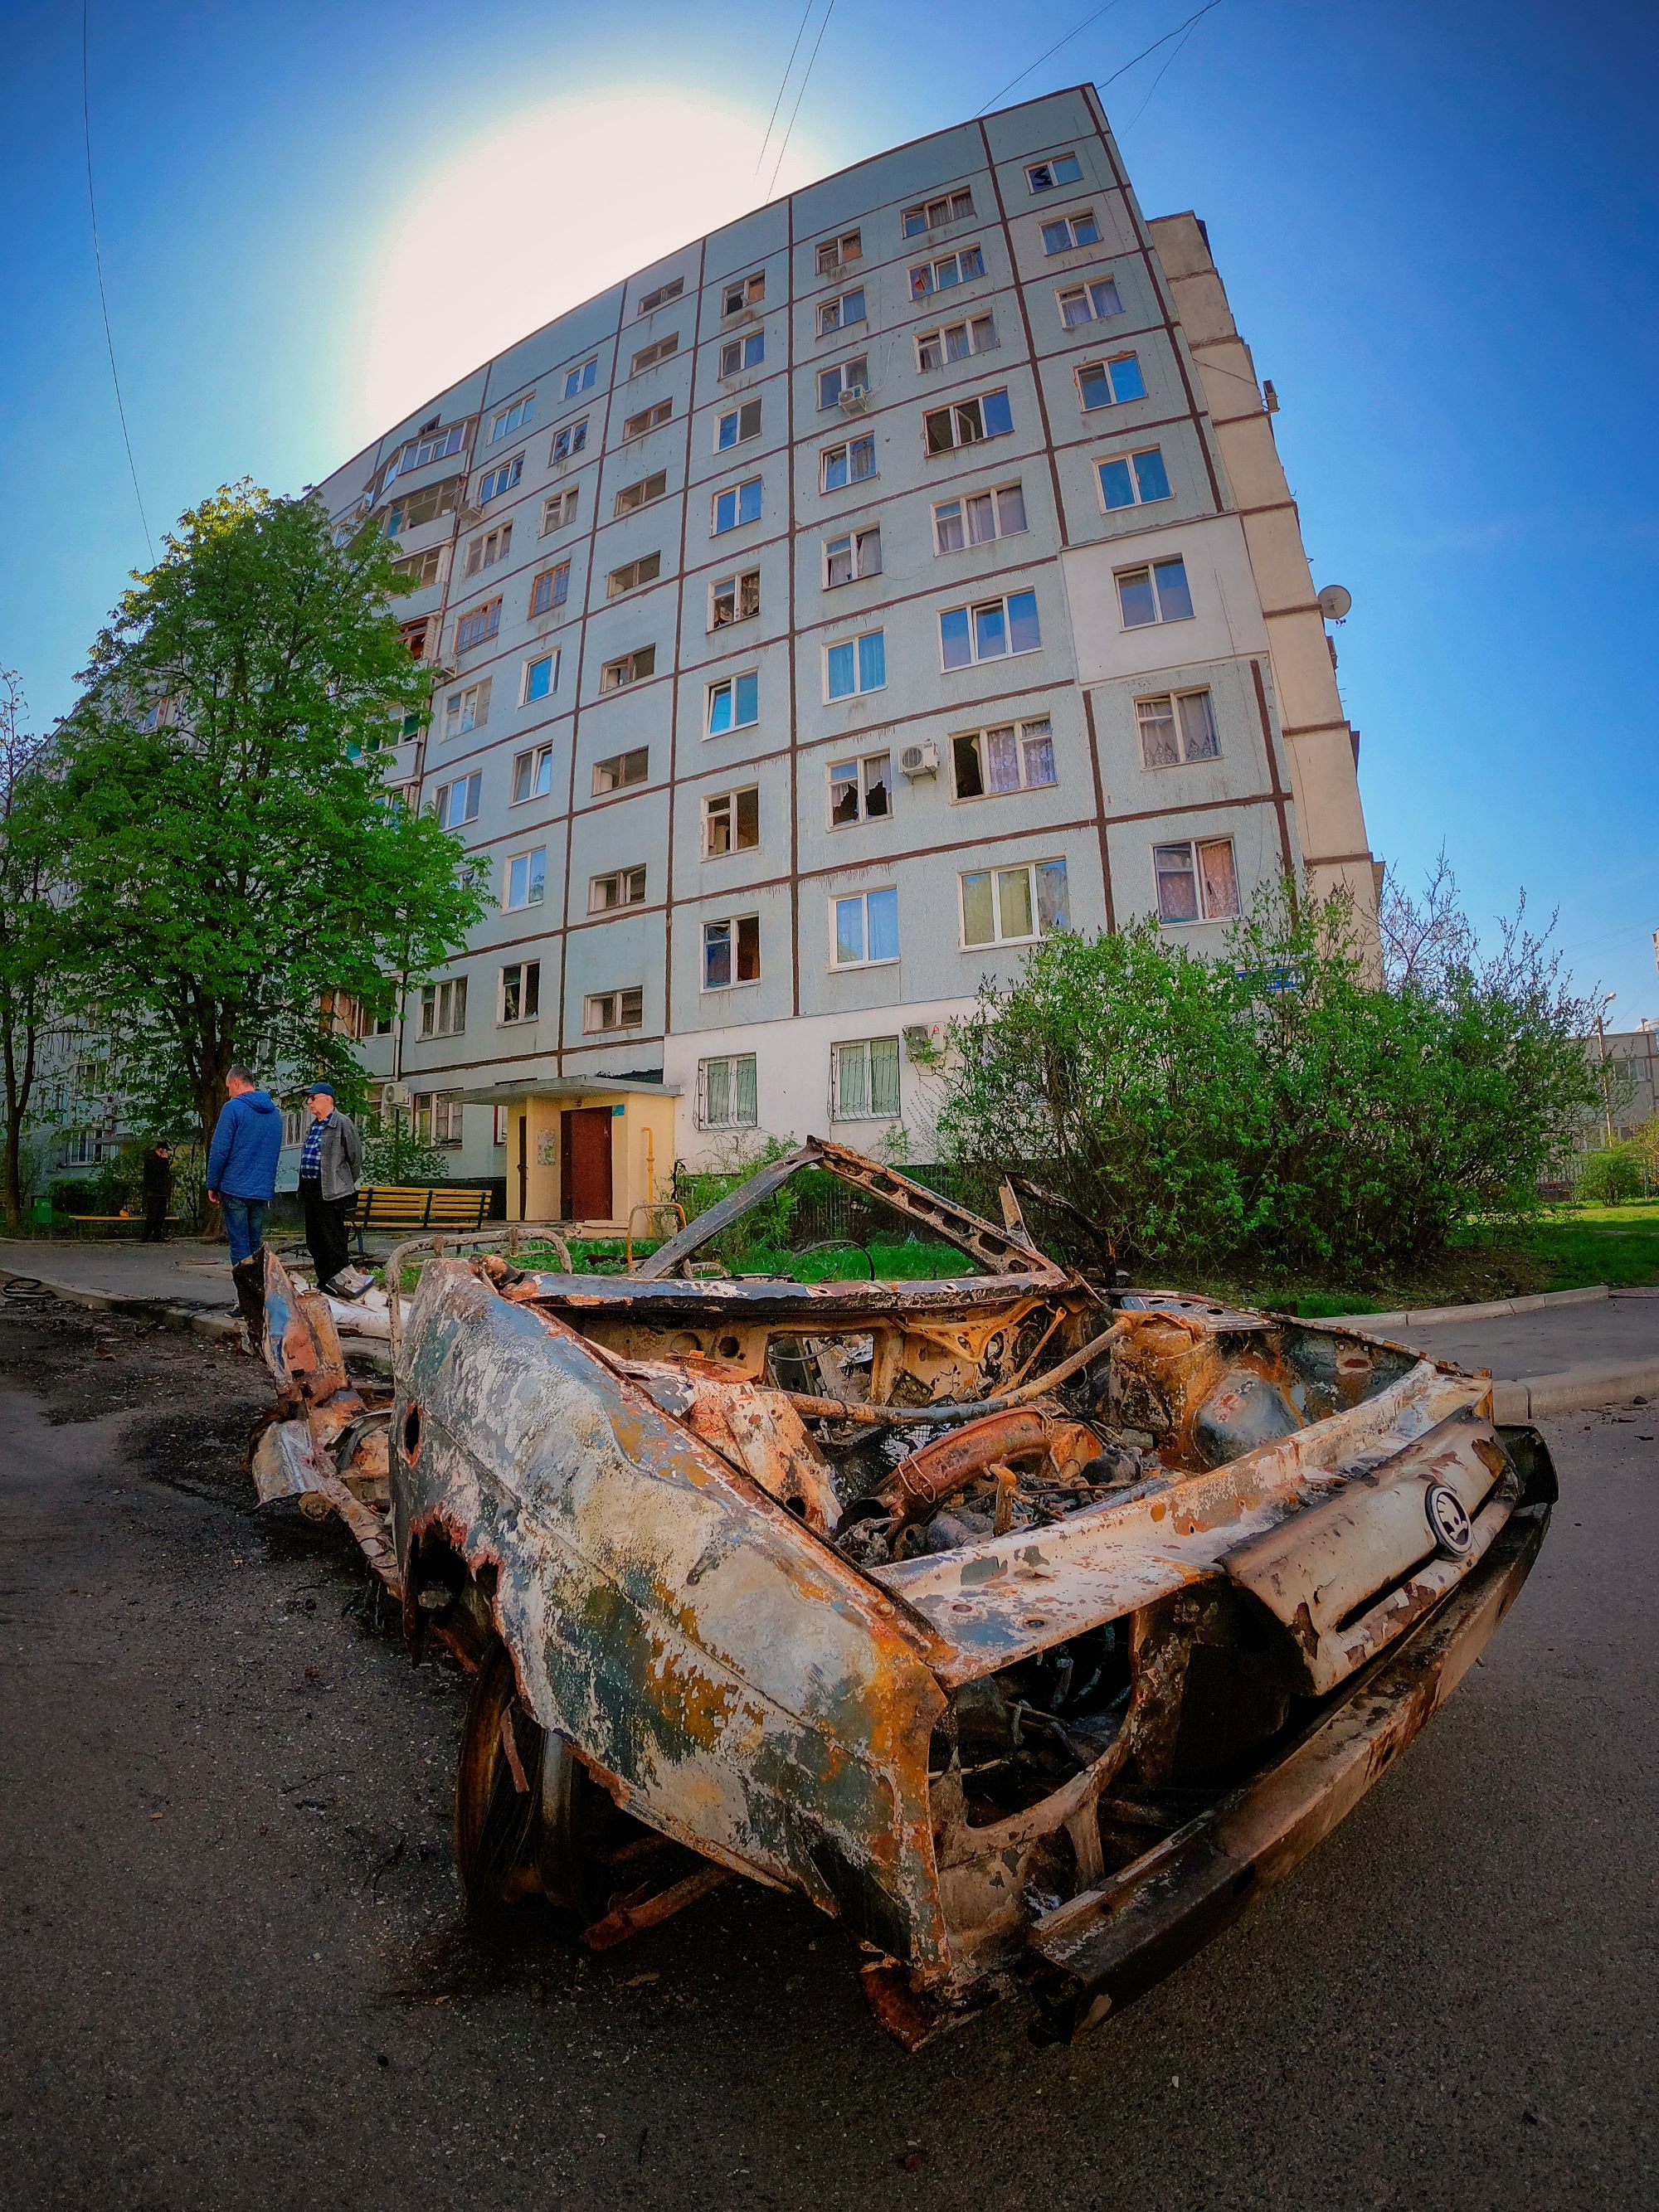 A burnt-out car near the entrance of an apartment building where Vadim used to go to feed his neighbour’s cats. The house was hit by four "Grad" shells, and 15 more shells hit the area nearby.